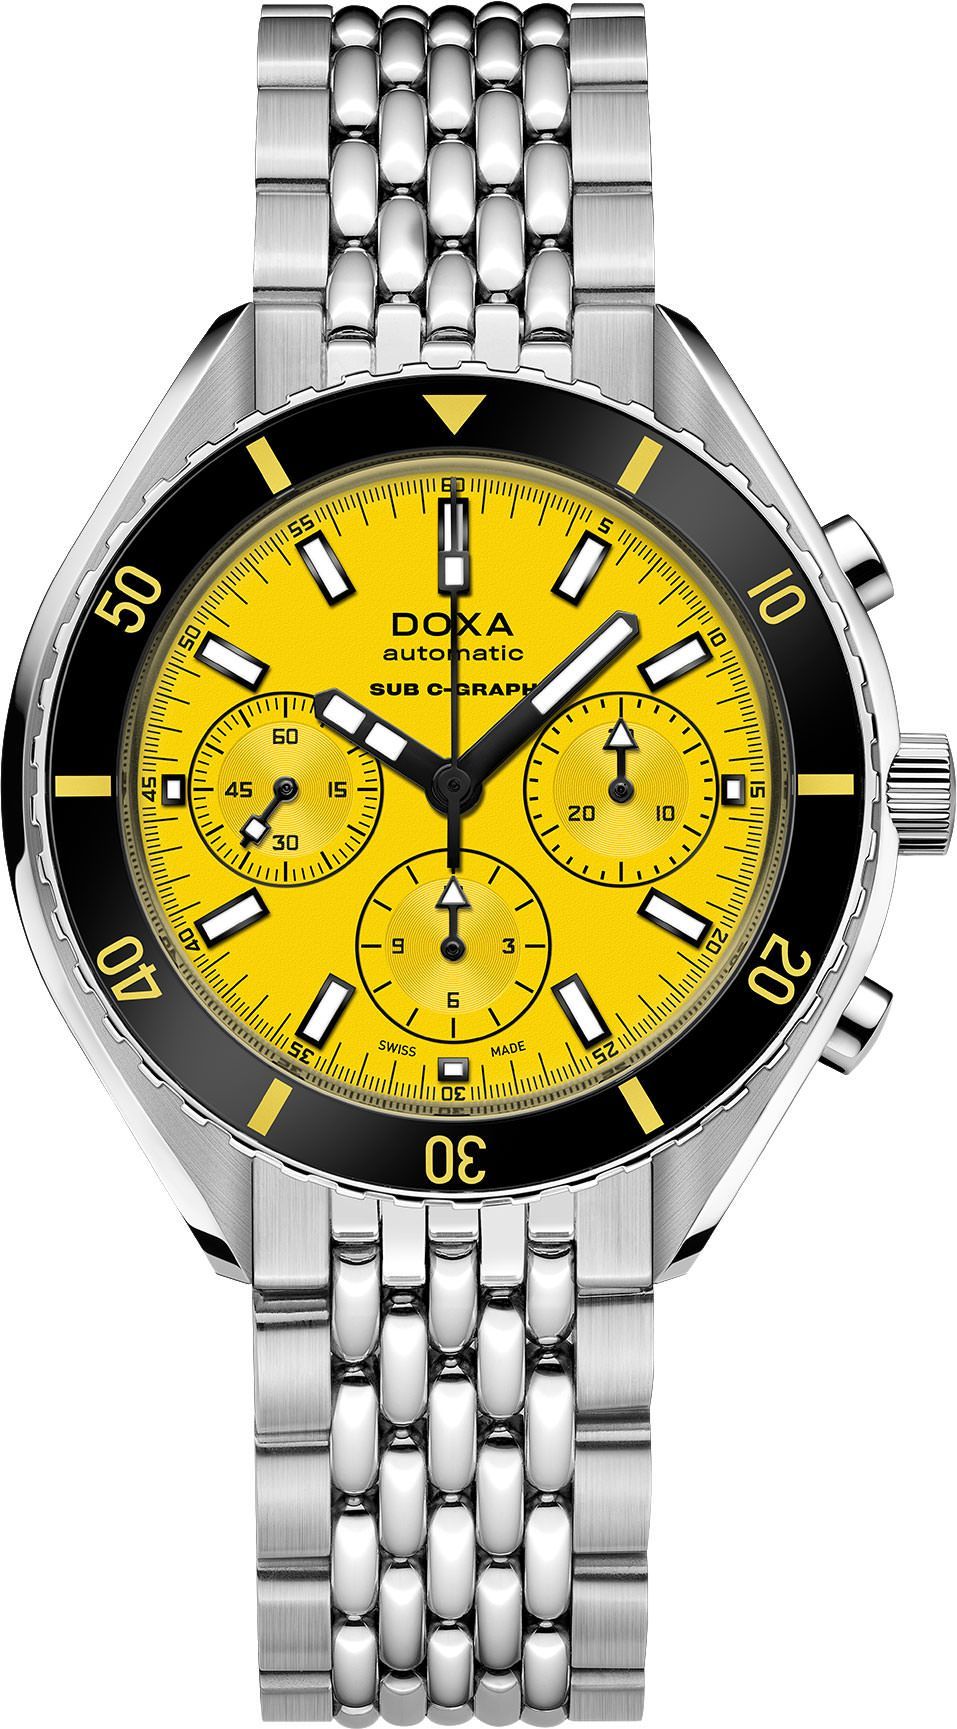 Doxa SUB 200 C-GRAPH Divingstar Yellow Dial 45 mm Automatic Watch For Men - 1